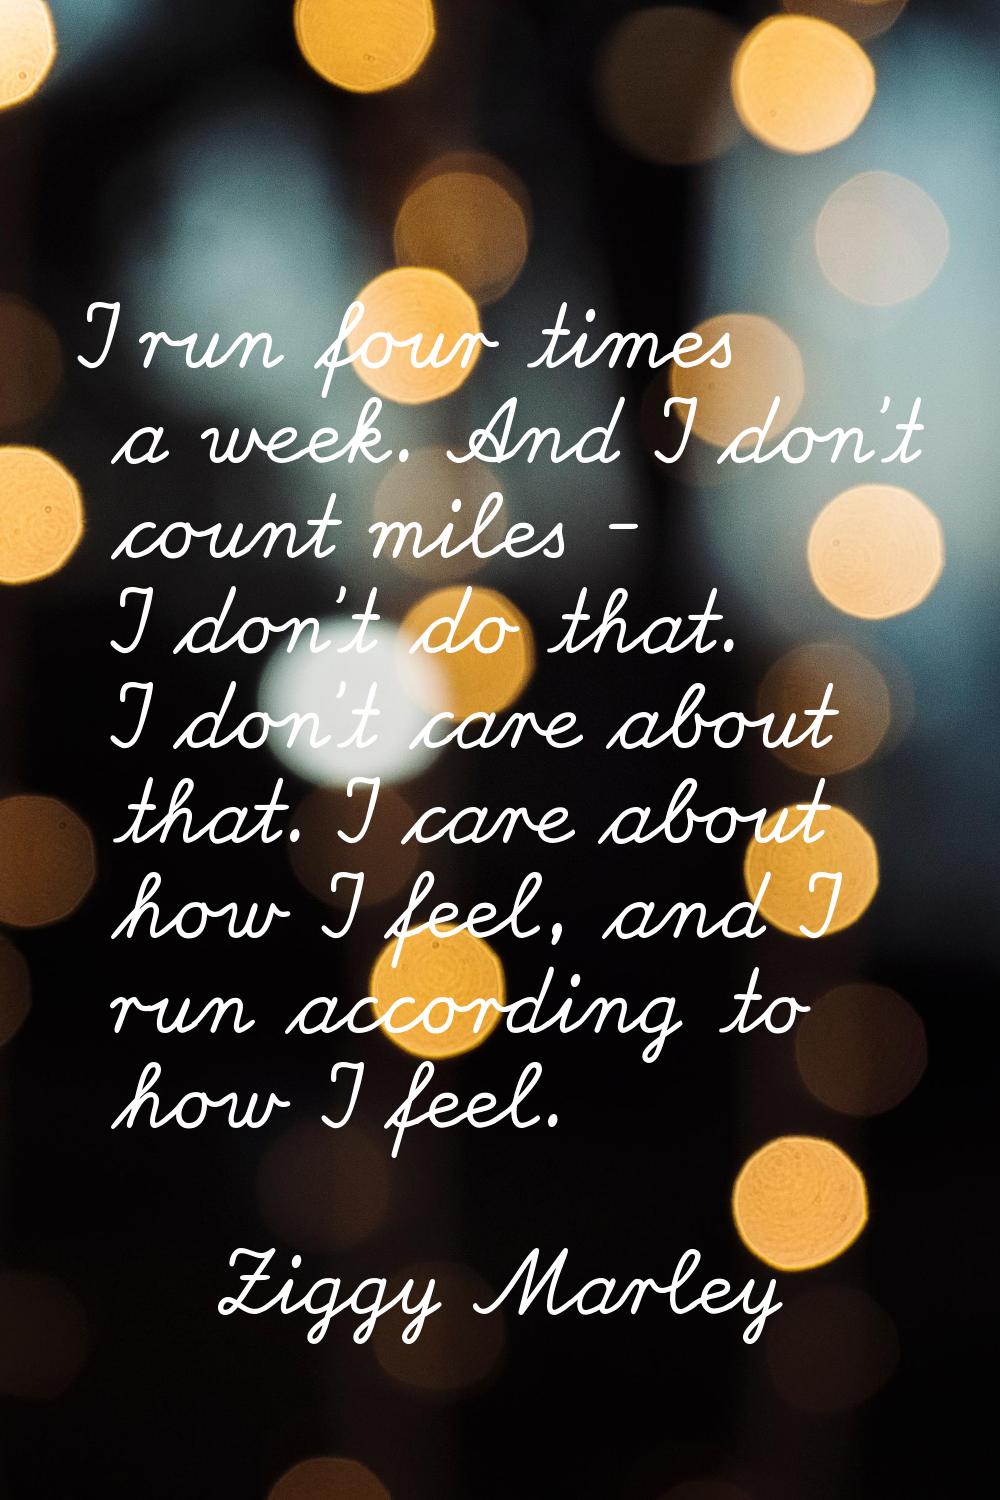 I run four times a week. And I don't count miles - I don't do that. I don't care about that. I care